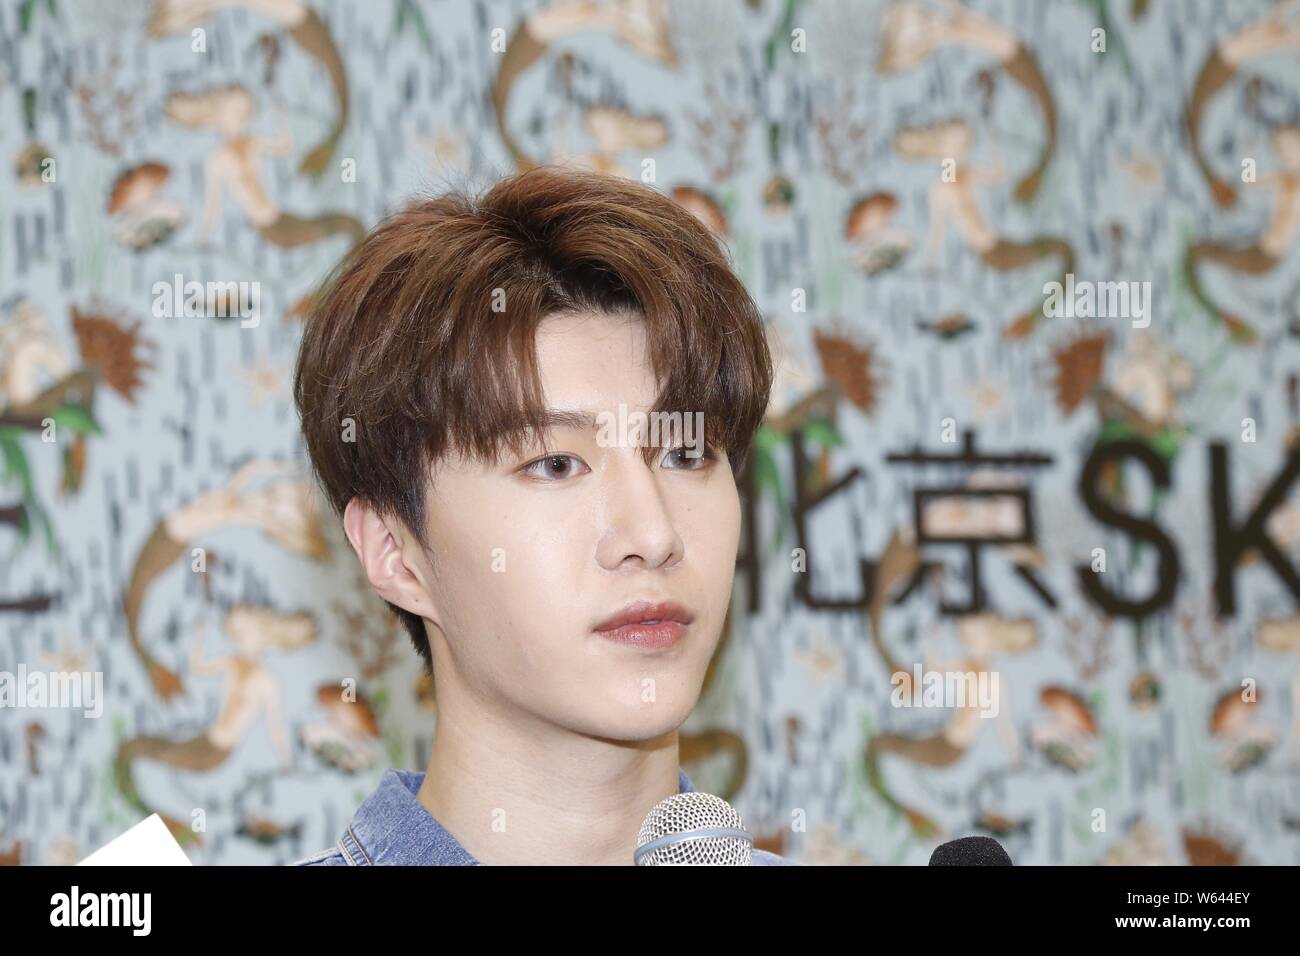 Chinese singer Fan Chengcheng, younger brother actress Fan Bingbing, of nine-member Chinese boy group Nine Percent attends promotional event Stock Photo Alamy